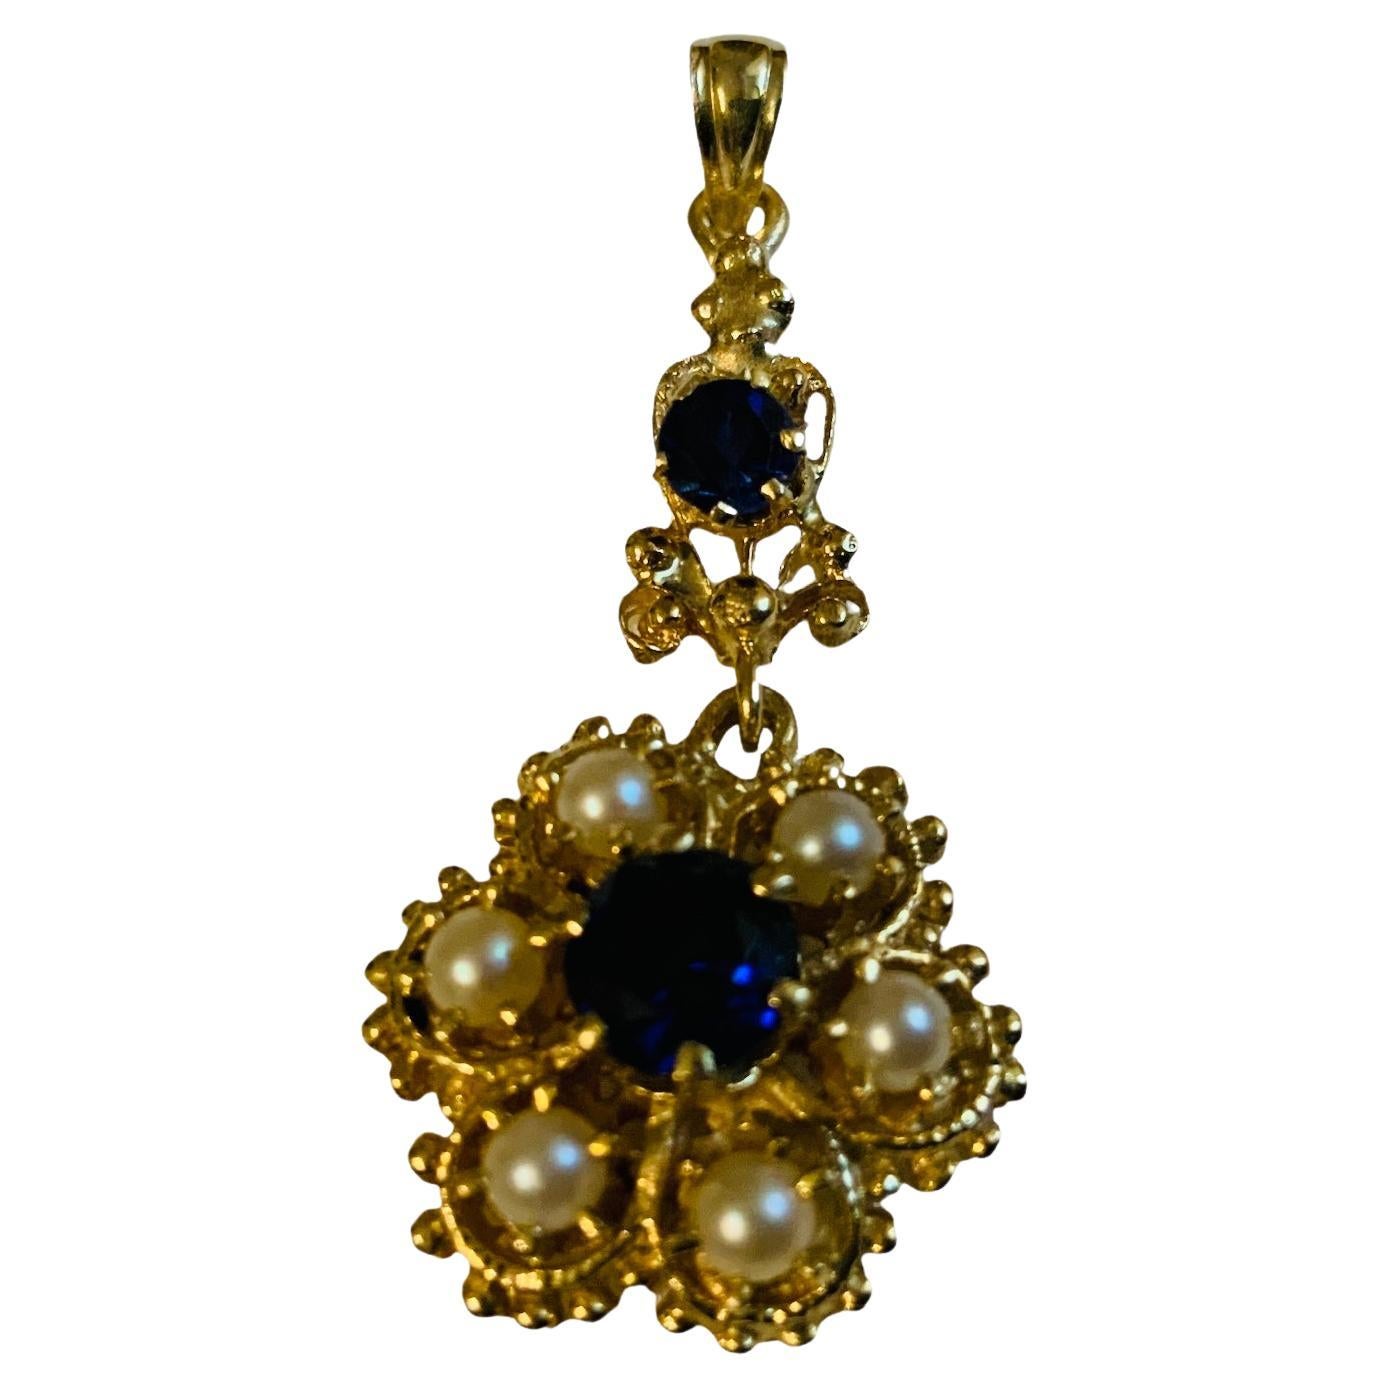 This is a 14K gold Pearl and Dark Blue Topaz pendant. It depicts a gold flower pendant adorned with six pearls in prong setting and a dark blue topaz also in prong setting in the center. Another smaller dark blue topaz is above the flower.